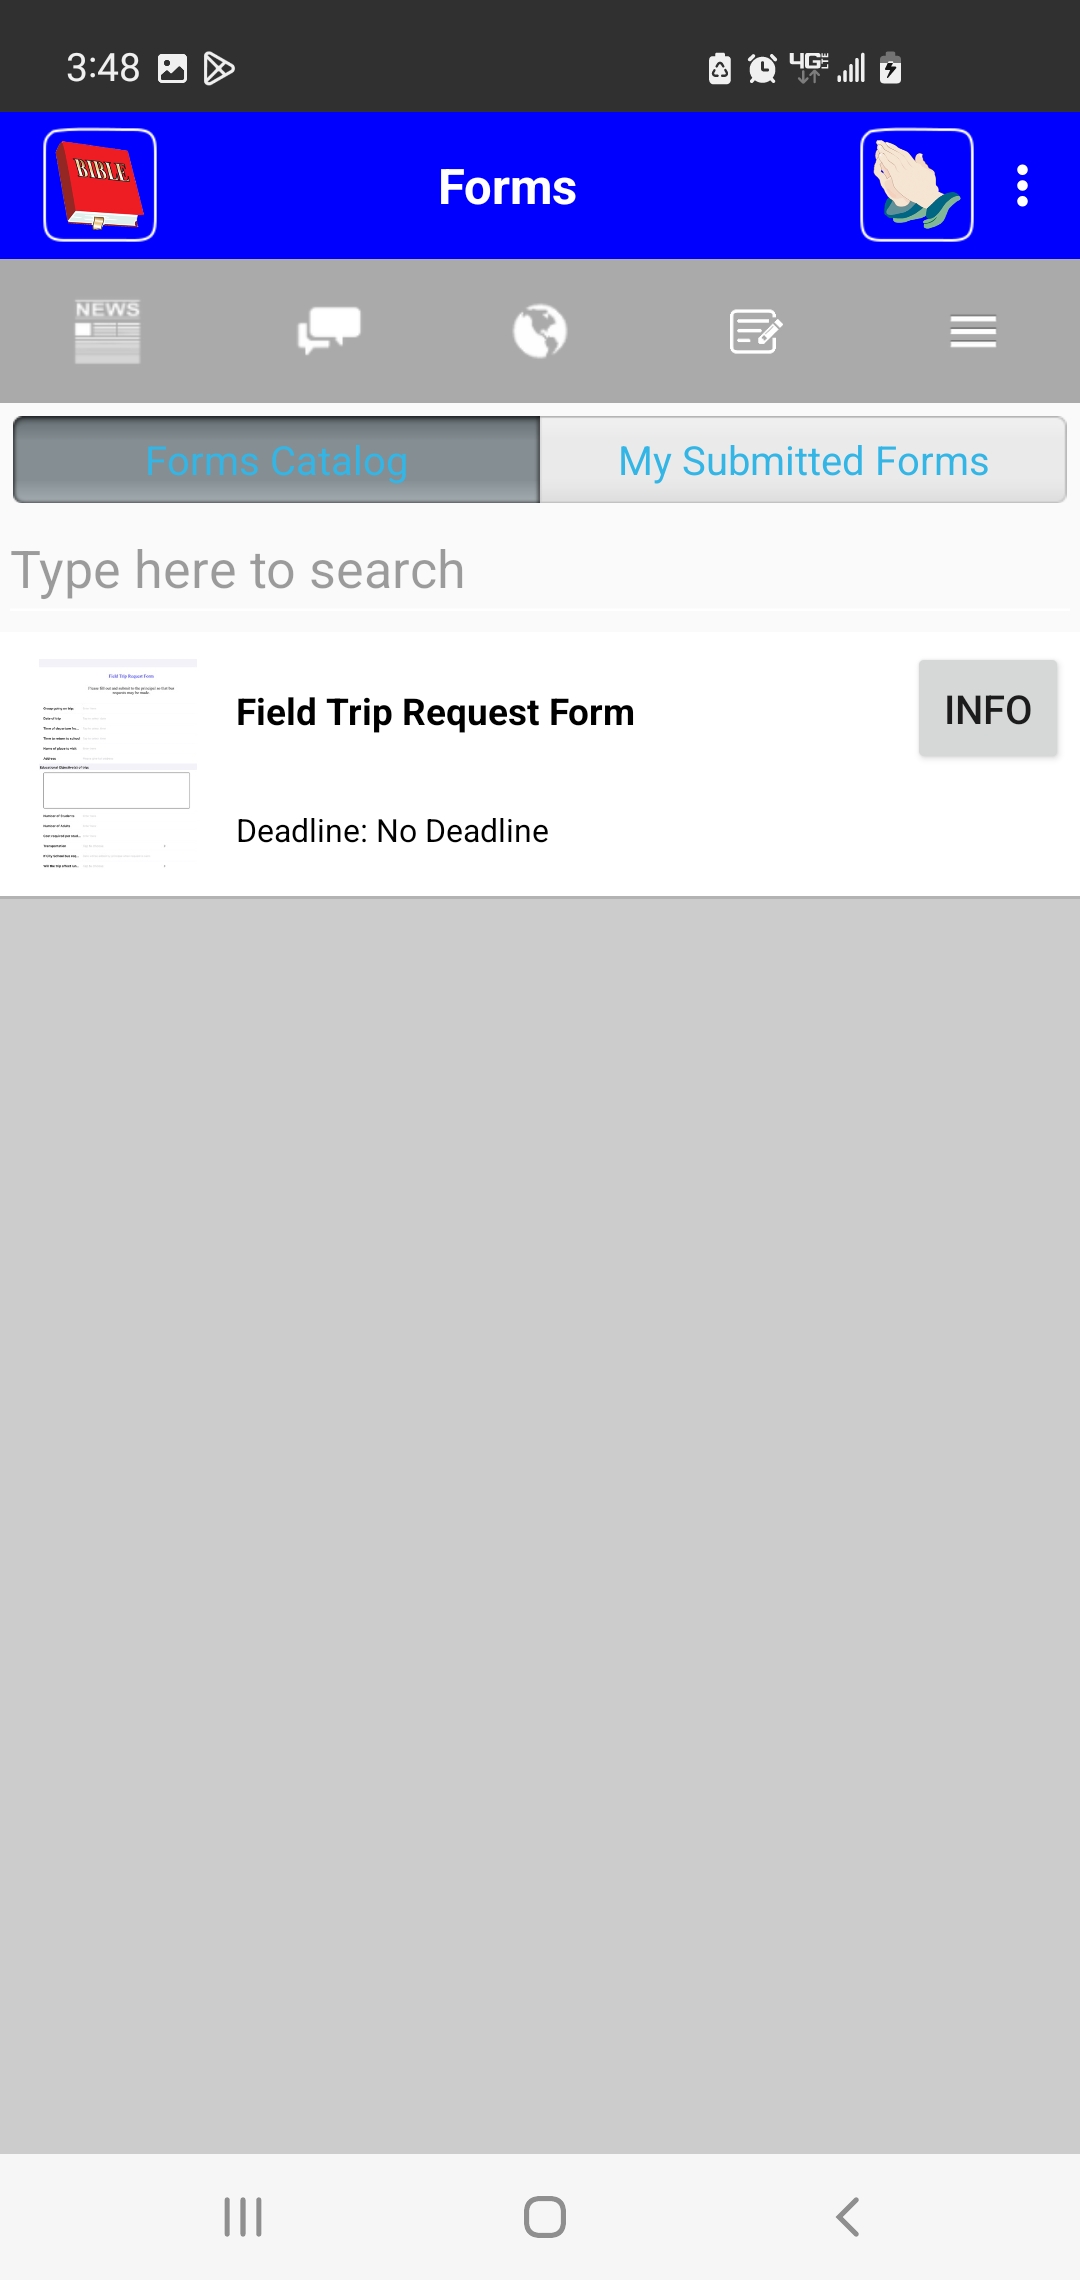 screen shot from app showing form to be completed